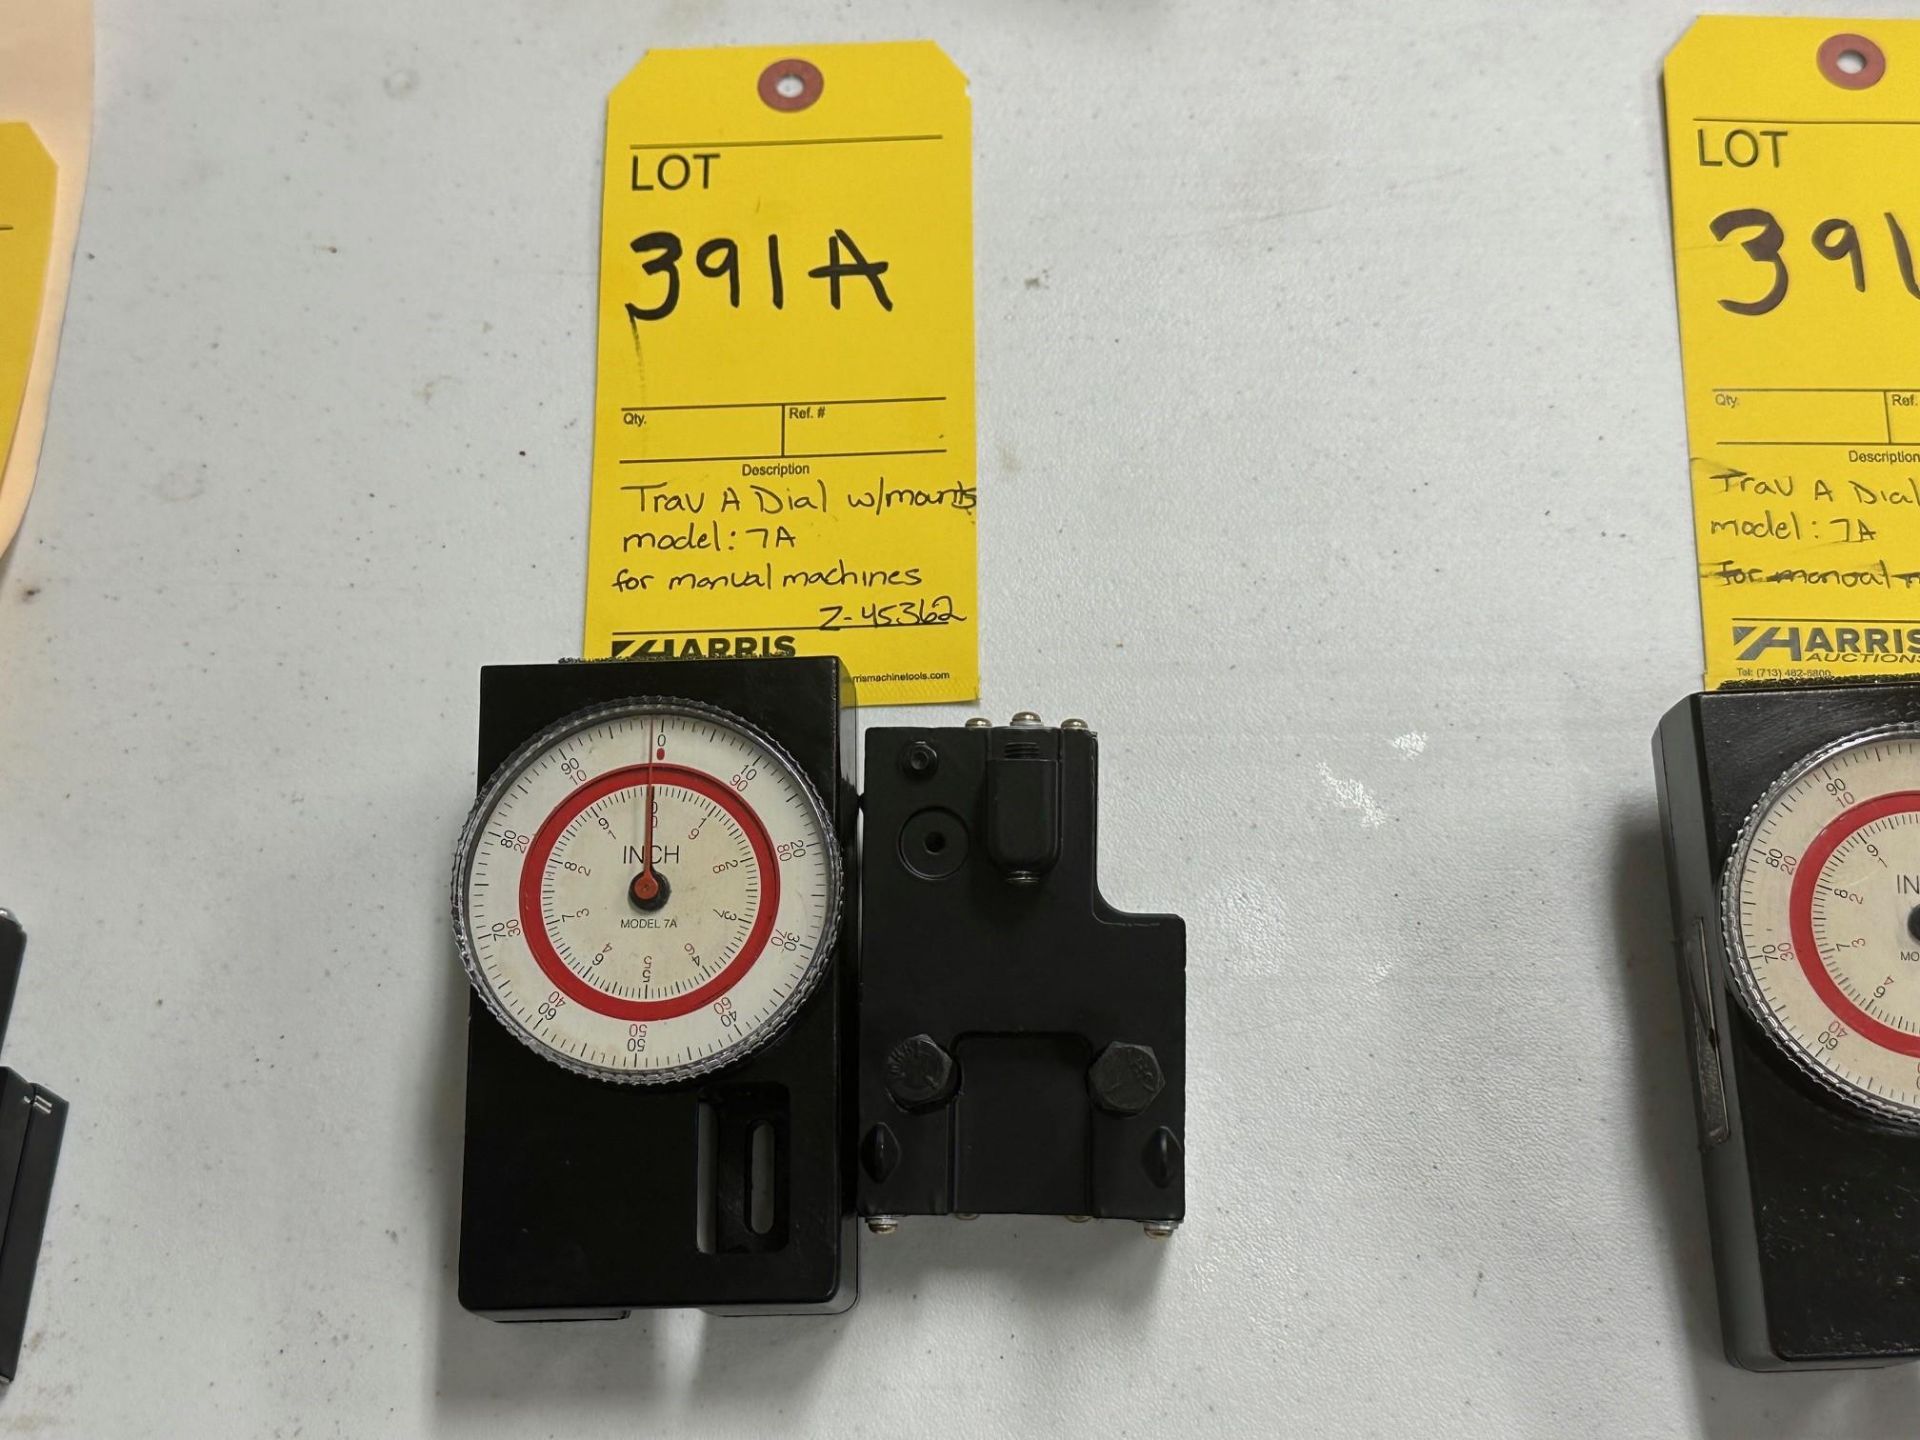 Trav A Dial w/ Mounts Model: 7A for manual machines. Serial Number Z-45362.  See photo.